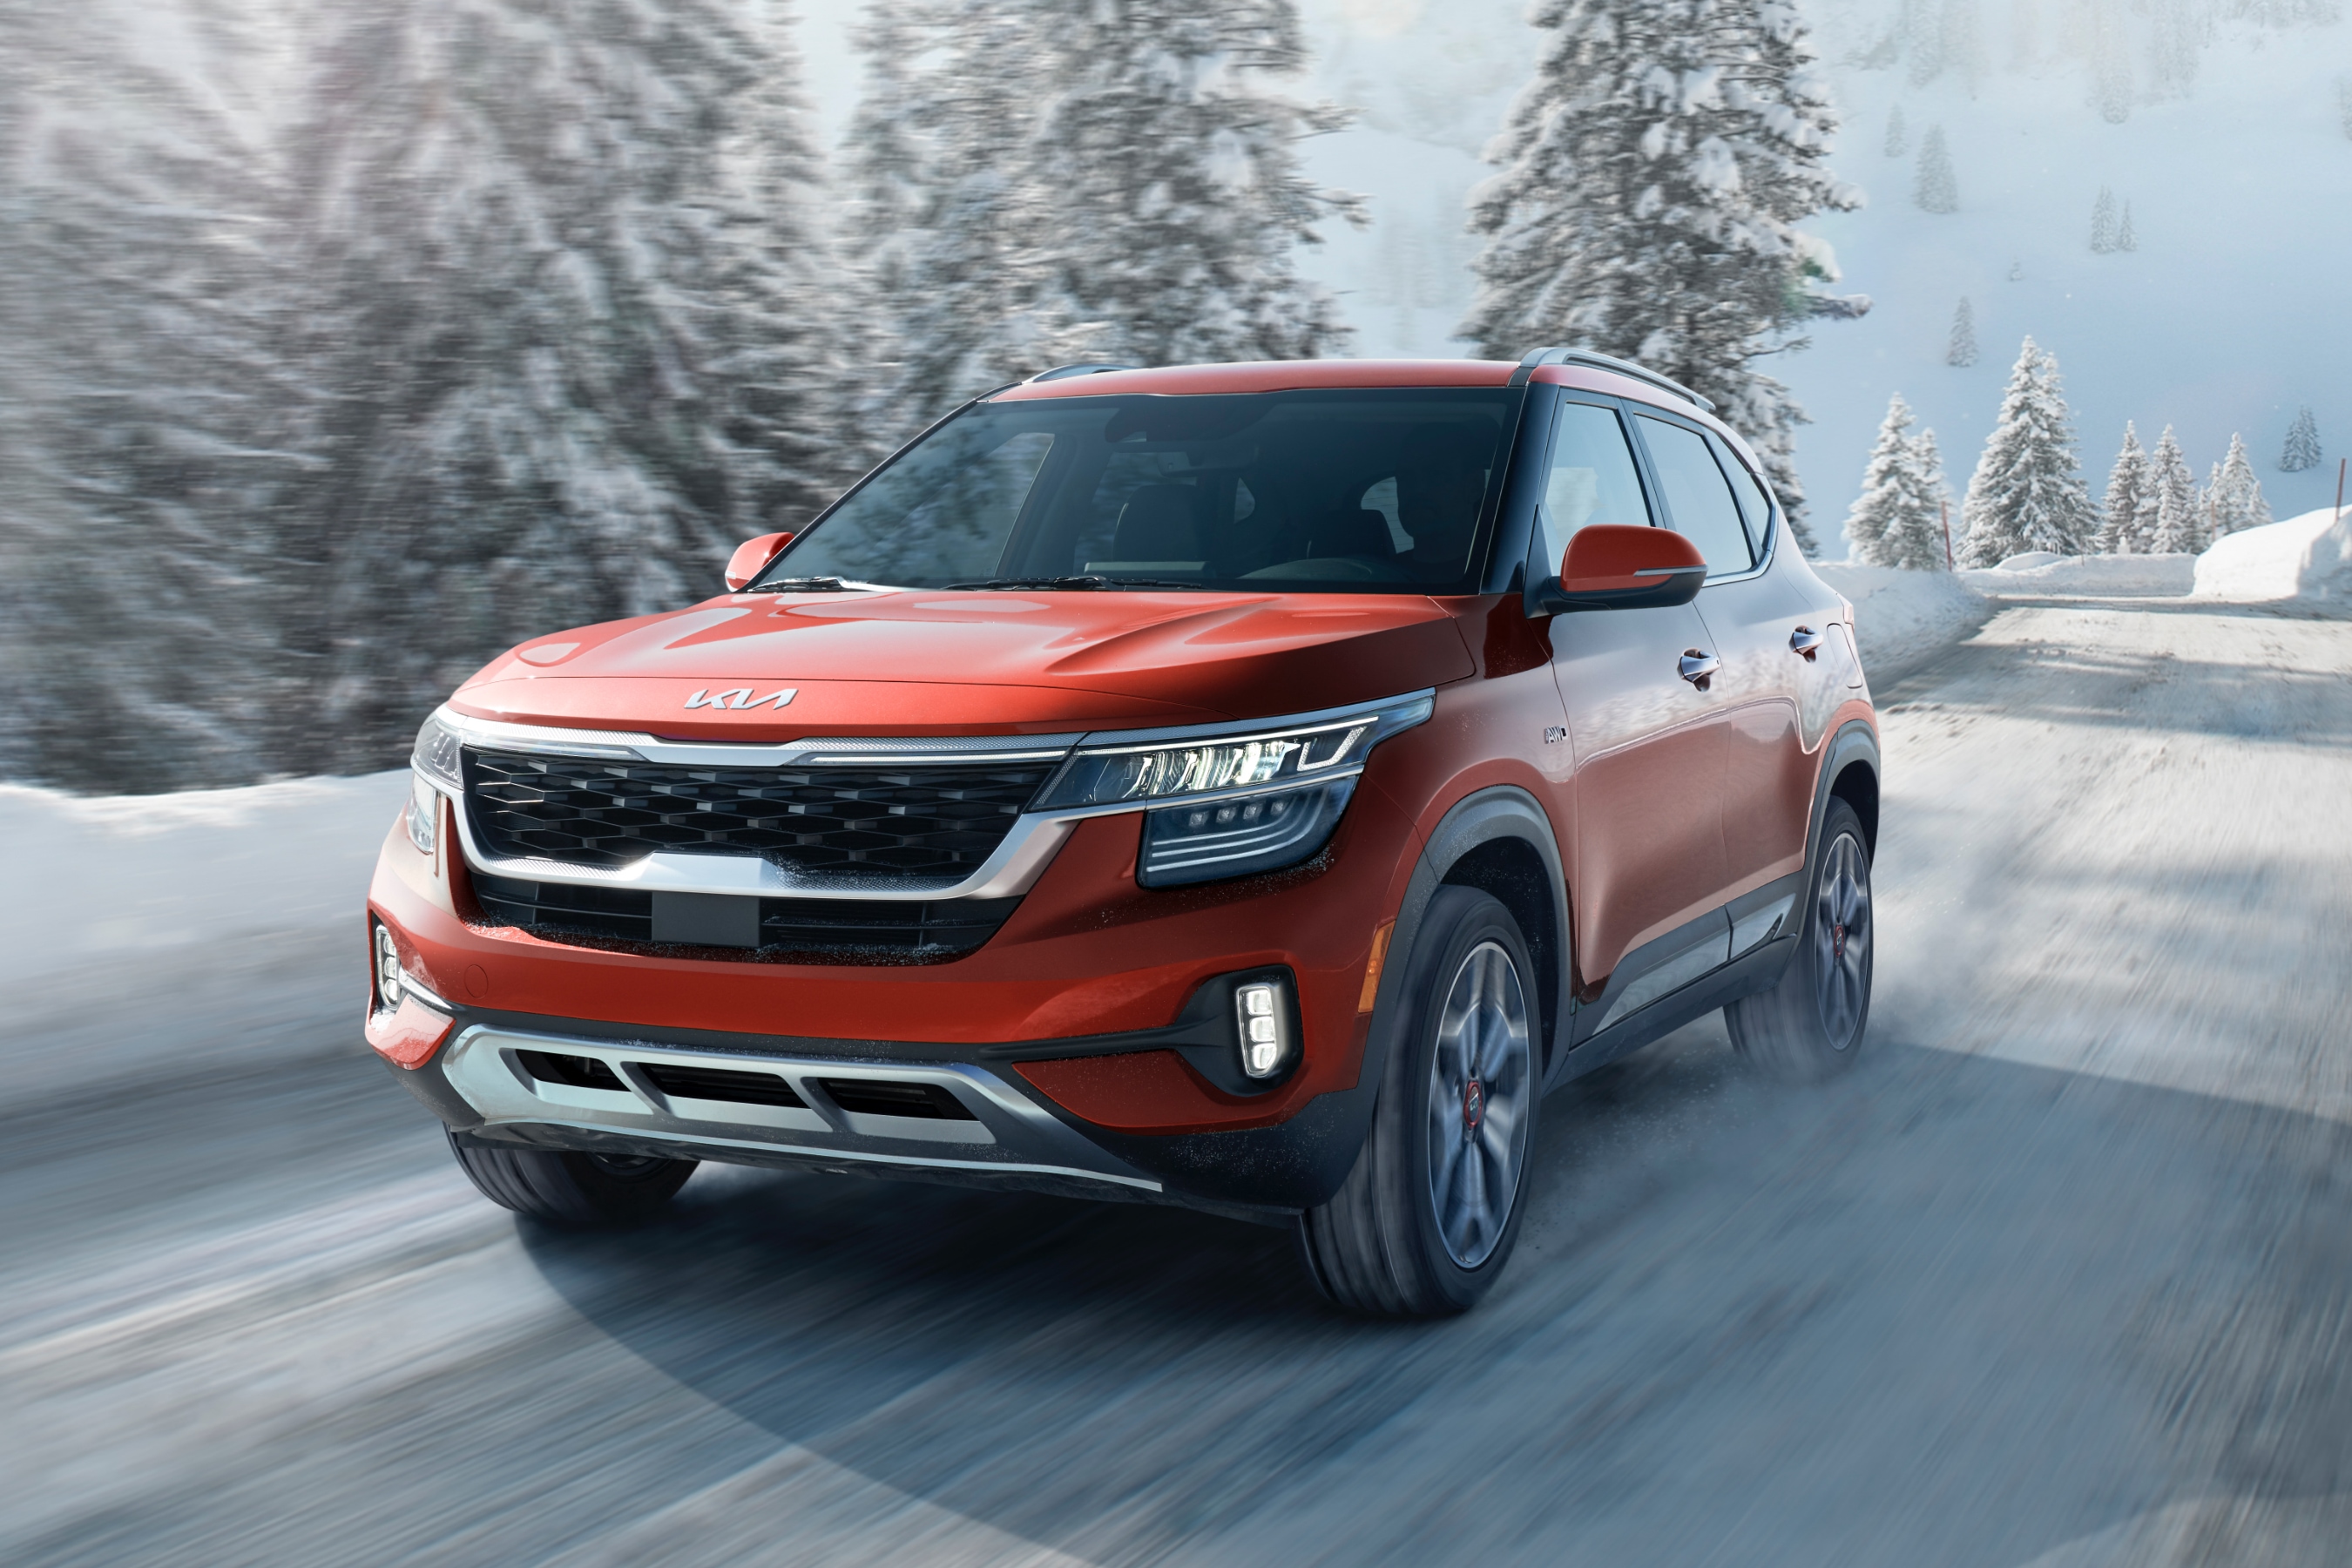 Which 2022 Kia Vehicles Have AWD?